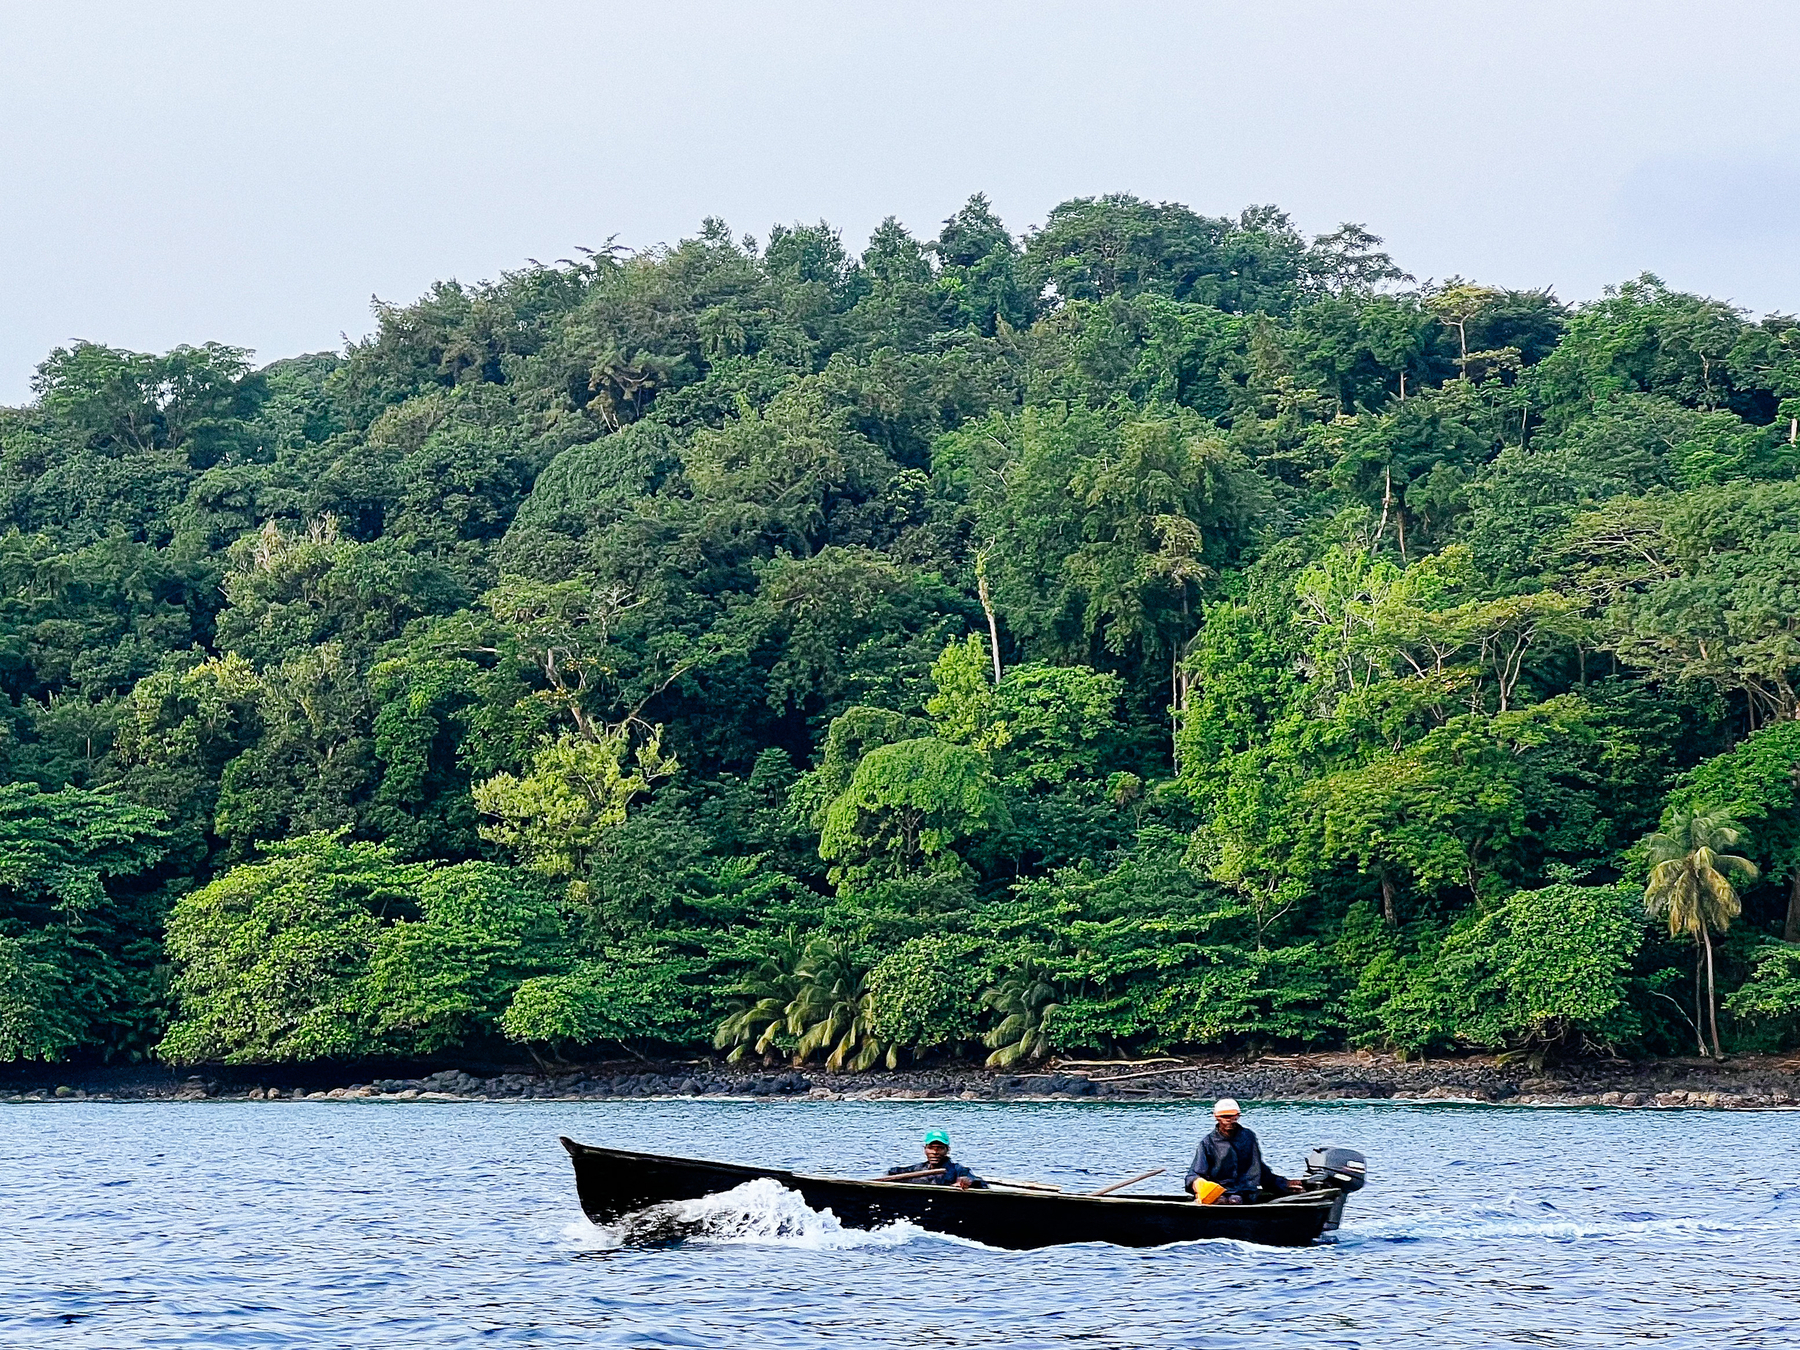 Fishermen ride a boat, forest in the background. 